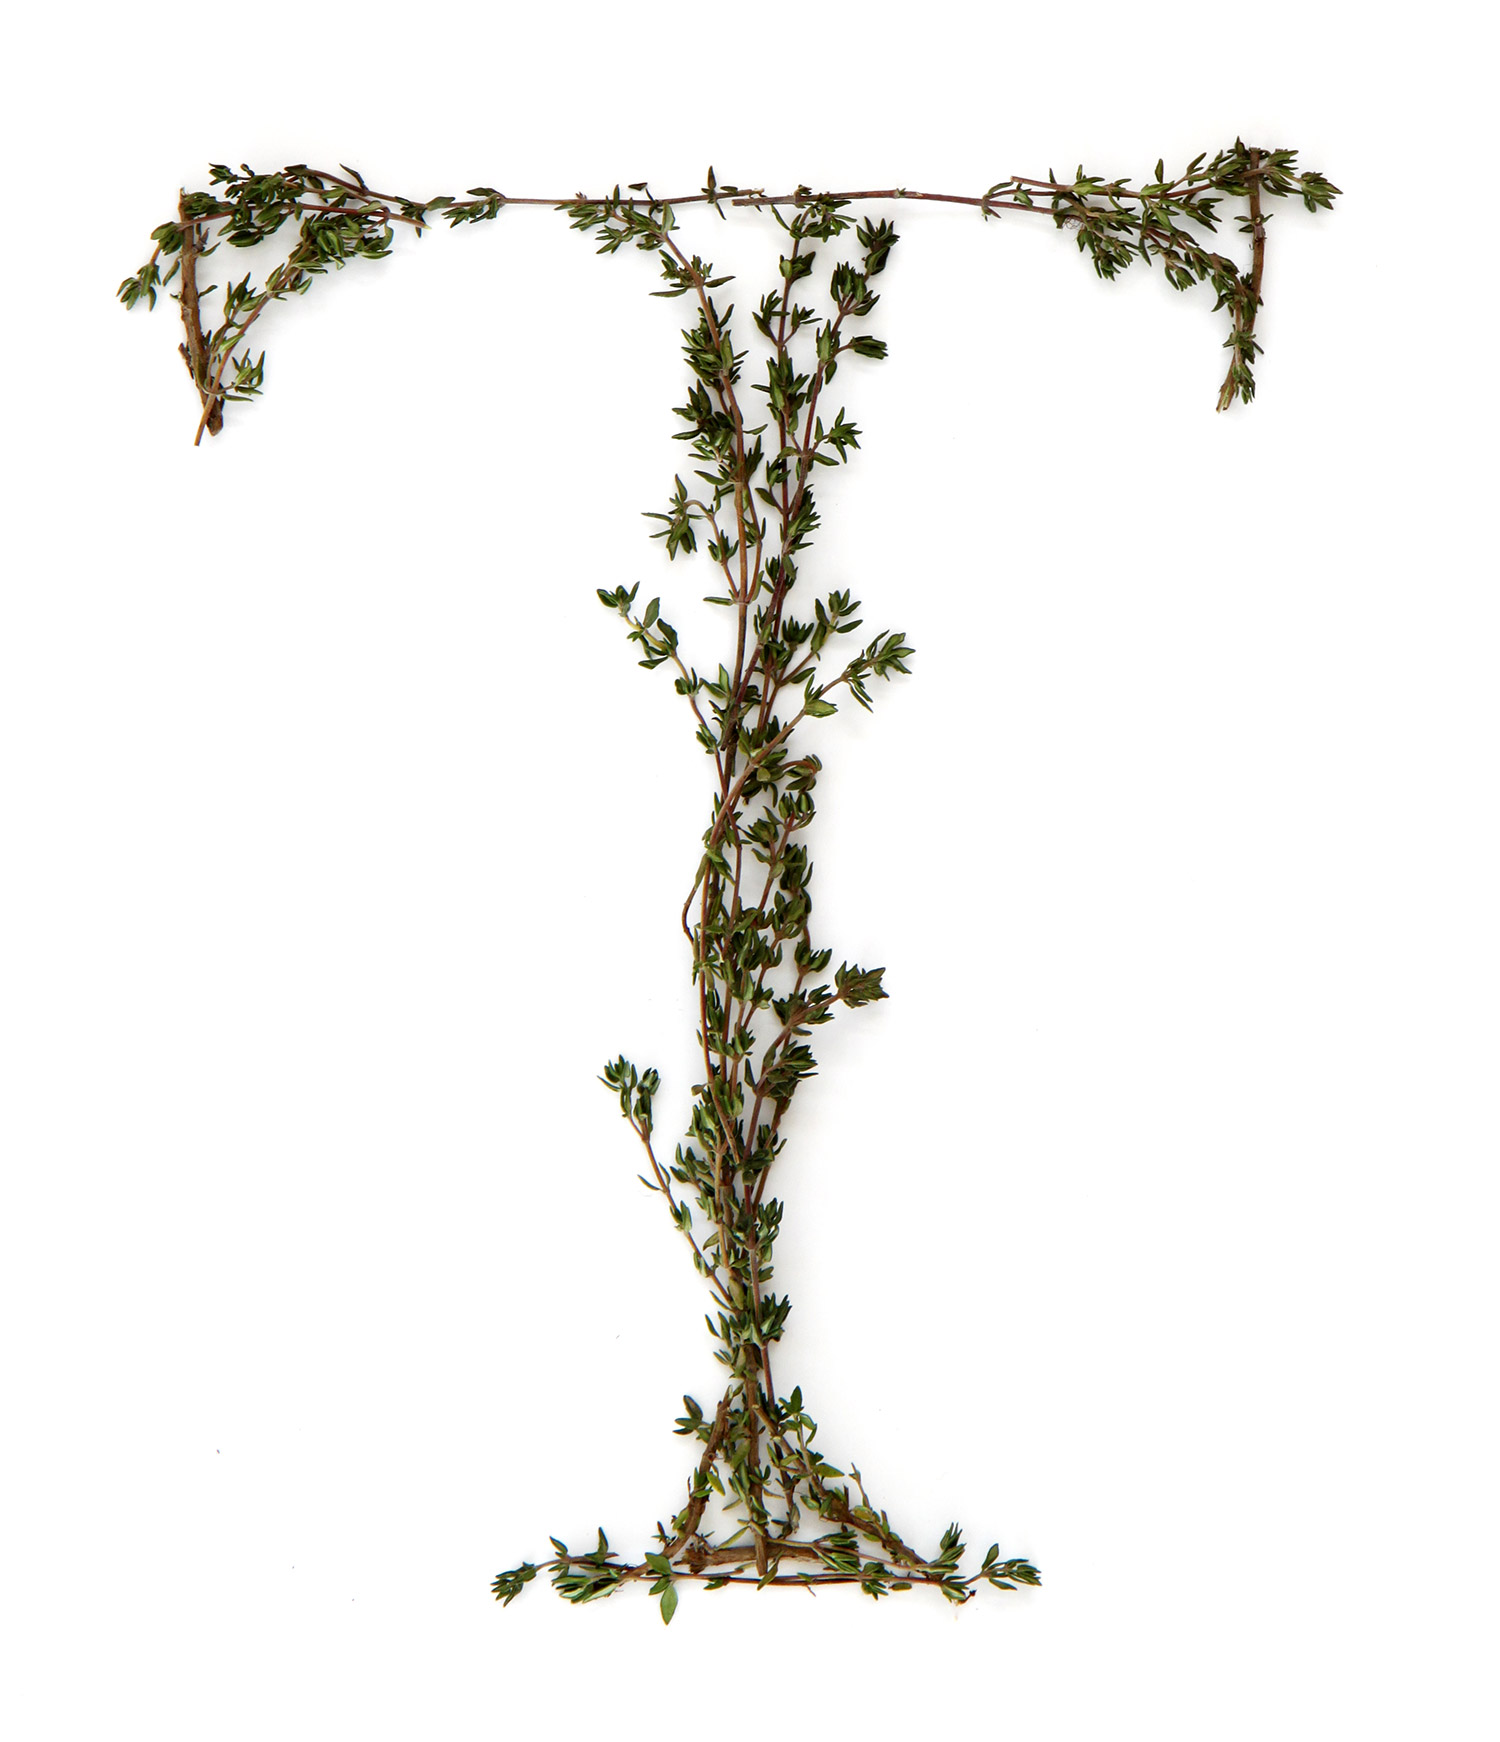 t is for thyme